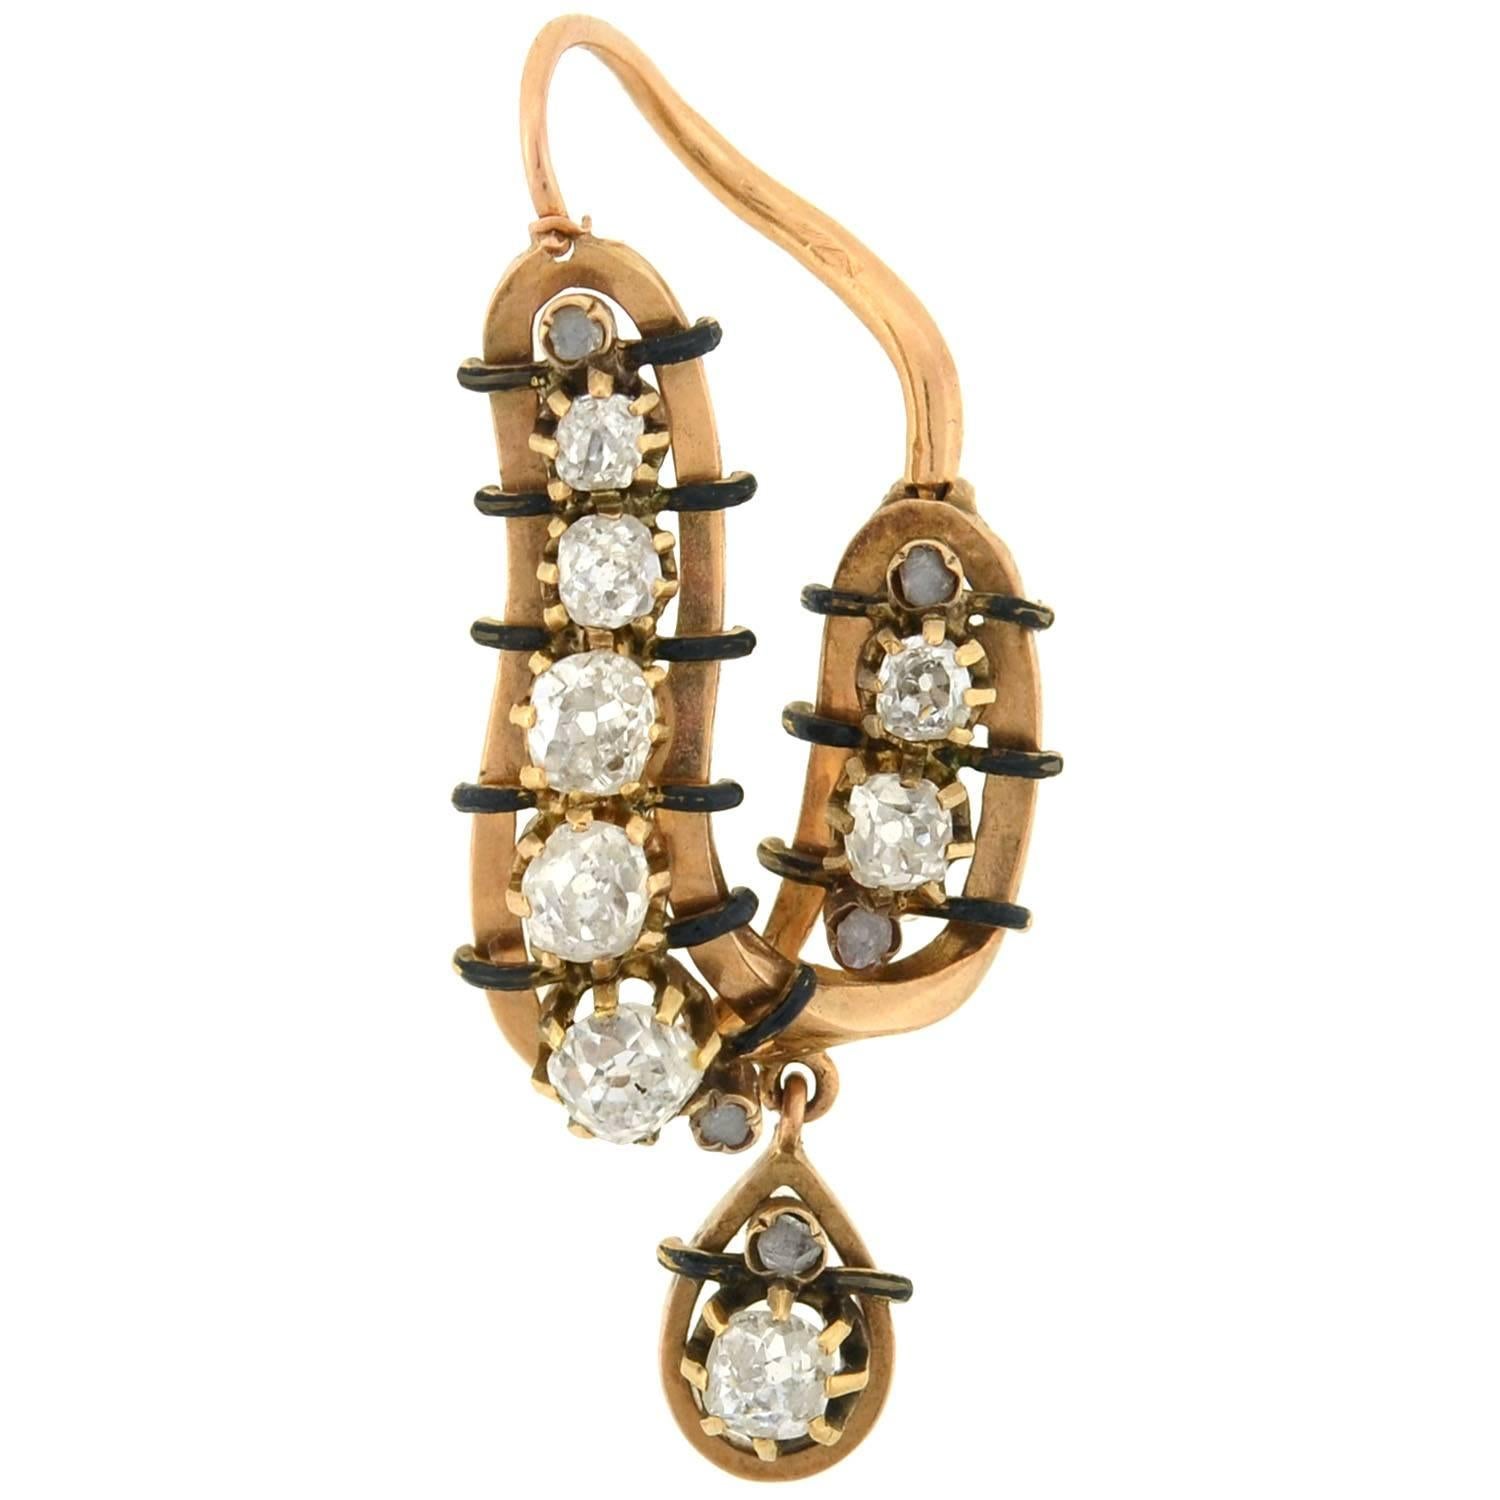 A magnificent pair of earrings from the Victorian (ca1880) era! These unusual earrings are French in origin, and boast an artistic asymmetrical design. Crafted in 18kt gold, the curvy framework is topped with sparkling diamonds and rich black enamel